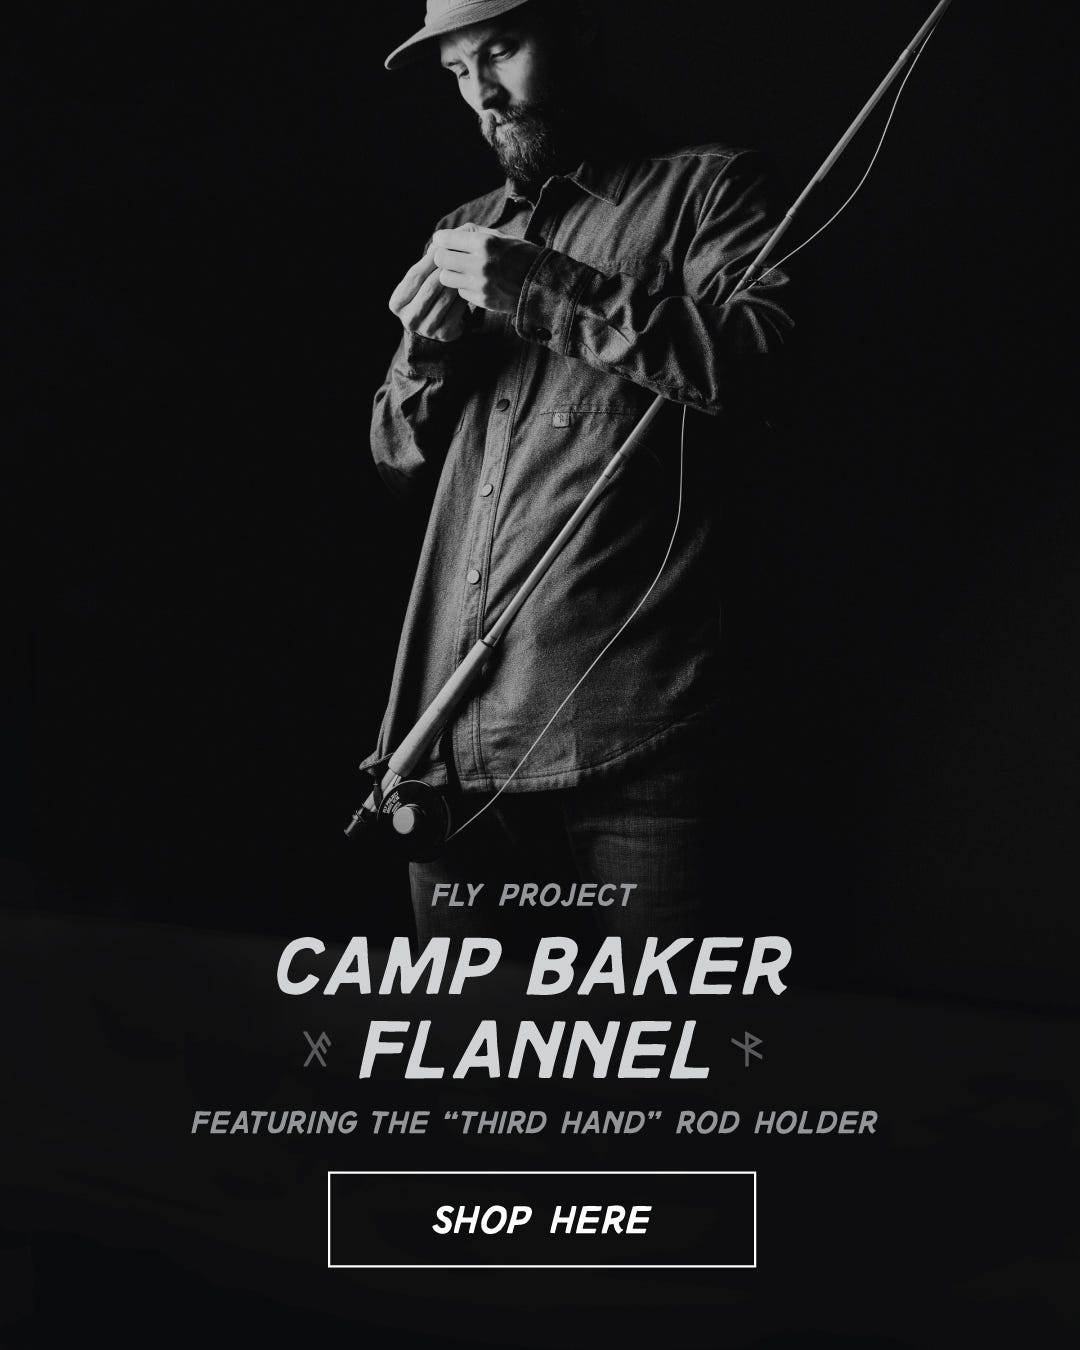 Introducing the Fly Project Camp Baker Flannel, featuring the "third hand" rod holder